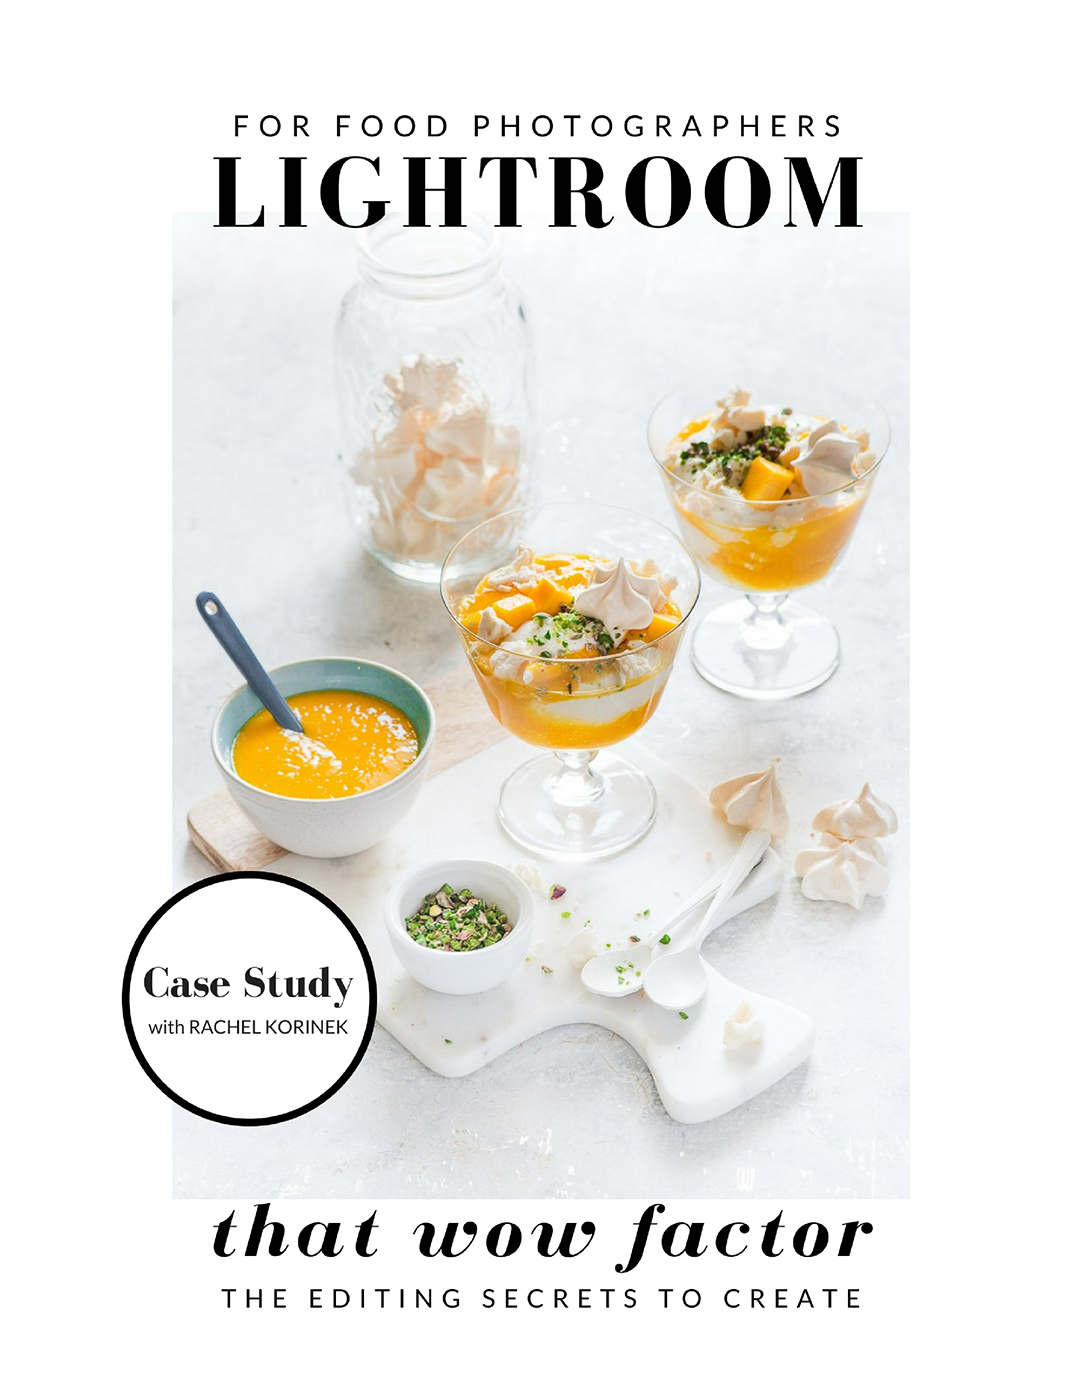 Lightroom for Food Photographers. How it will give you to confidence to edit for that wow factor you want in your photos.